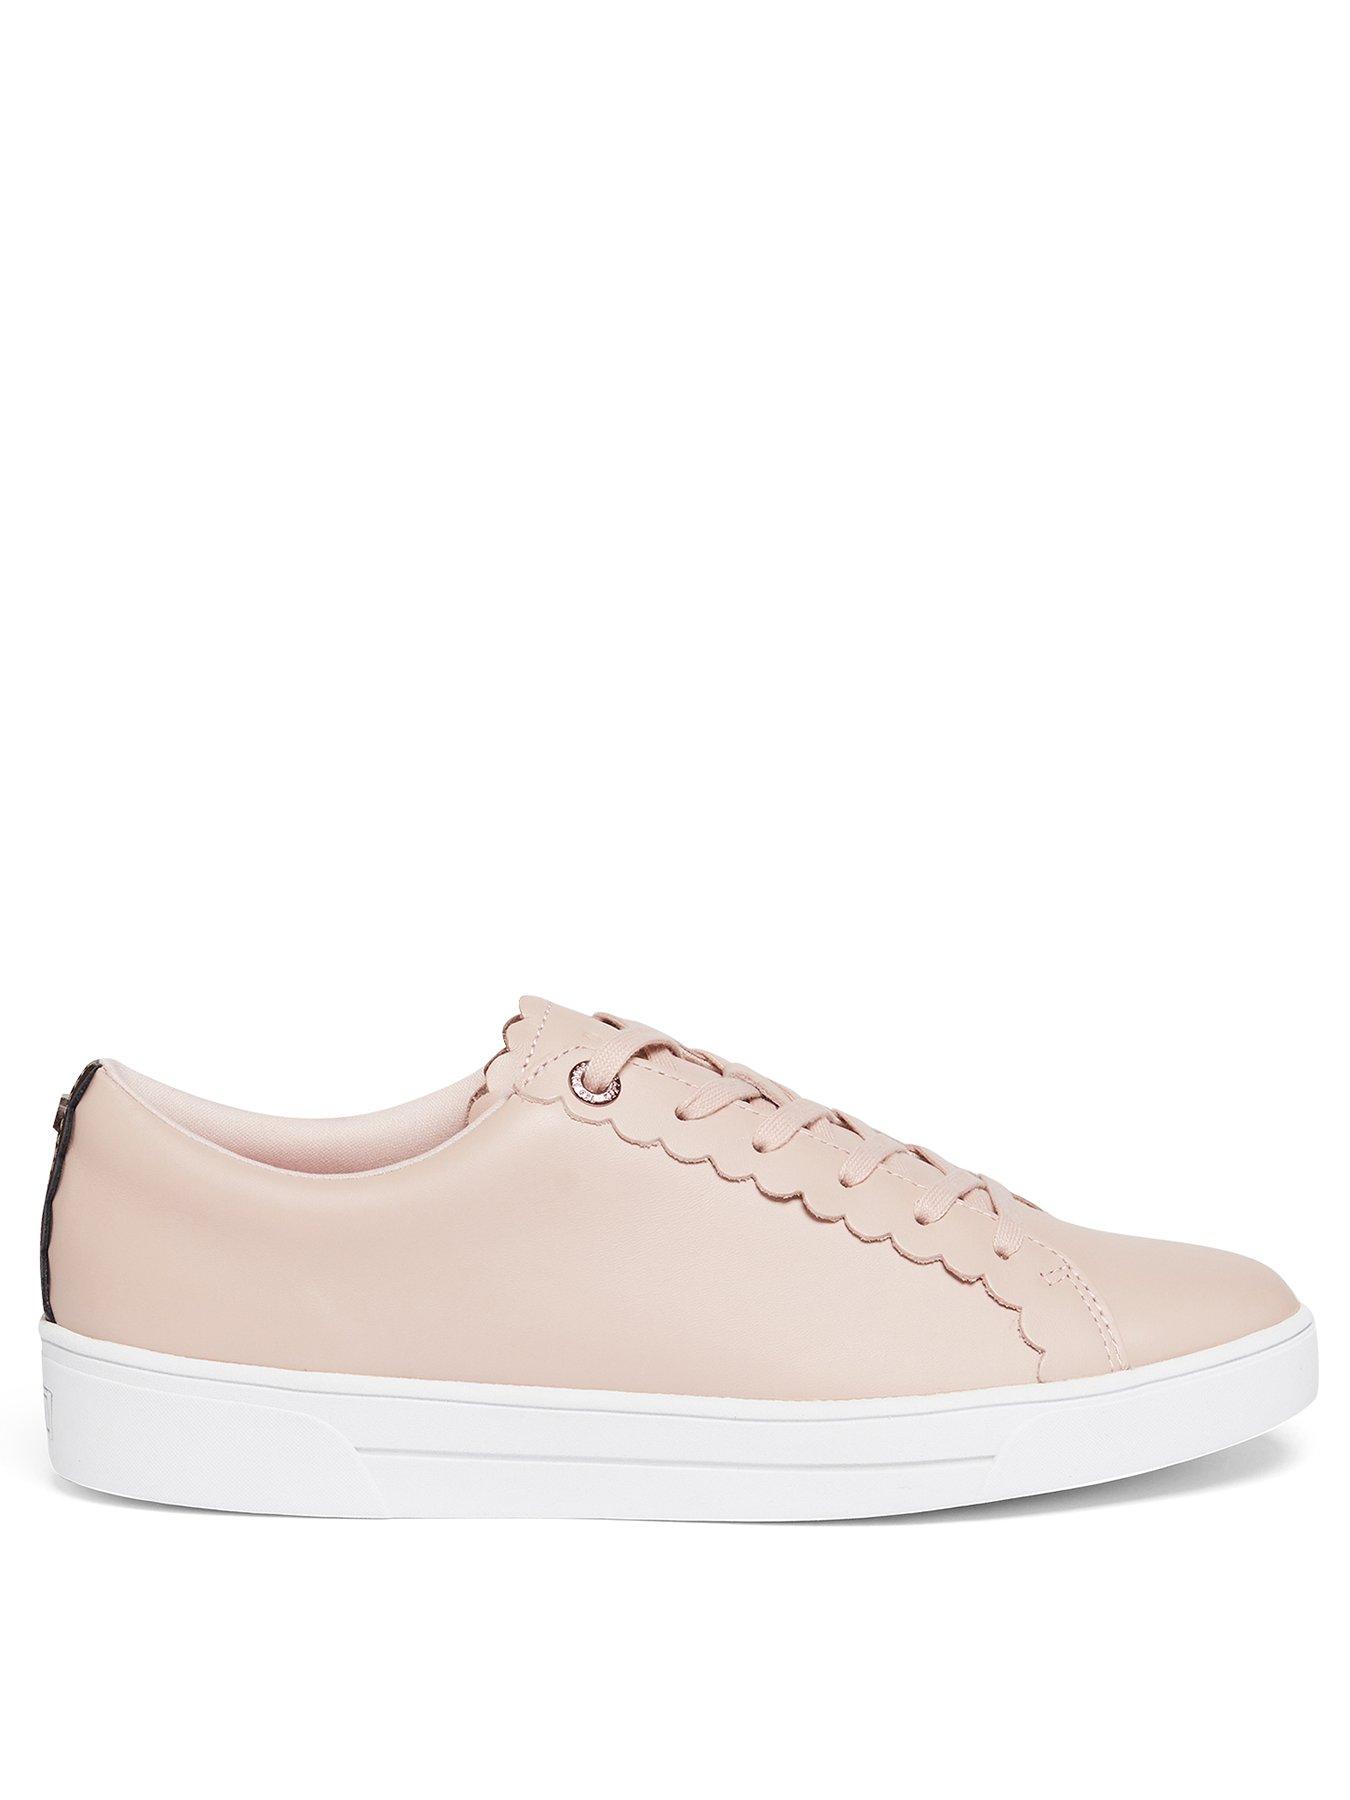 ted baker trainers girls